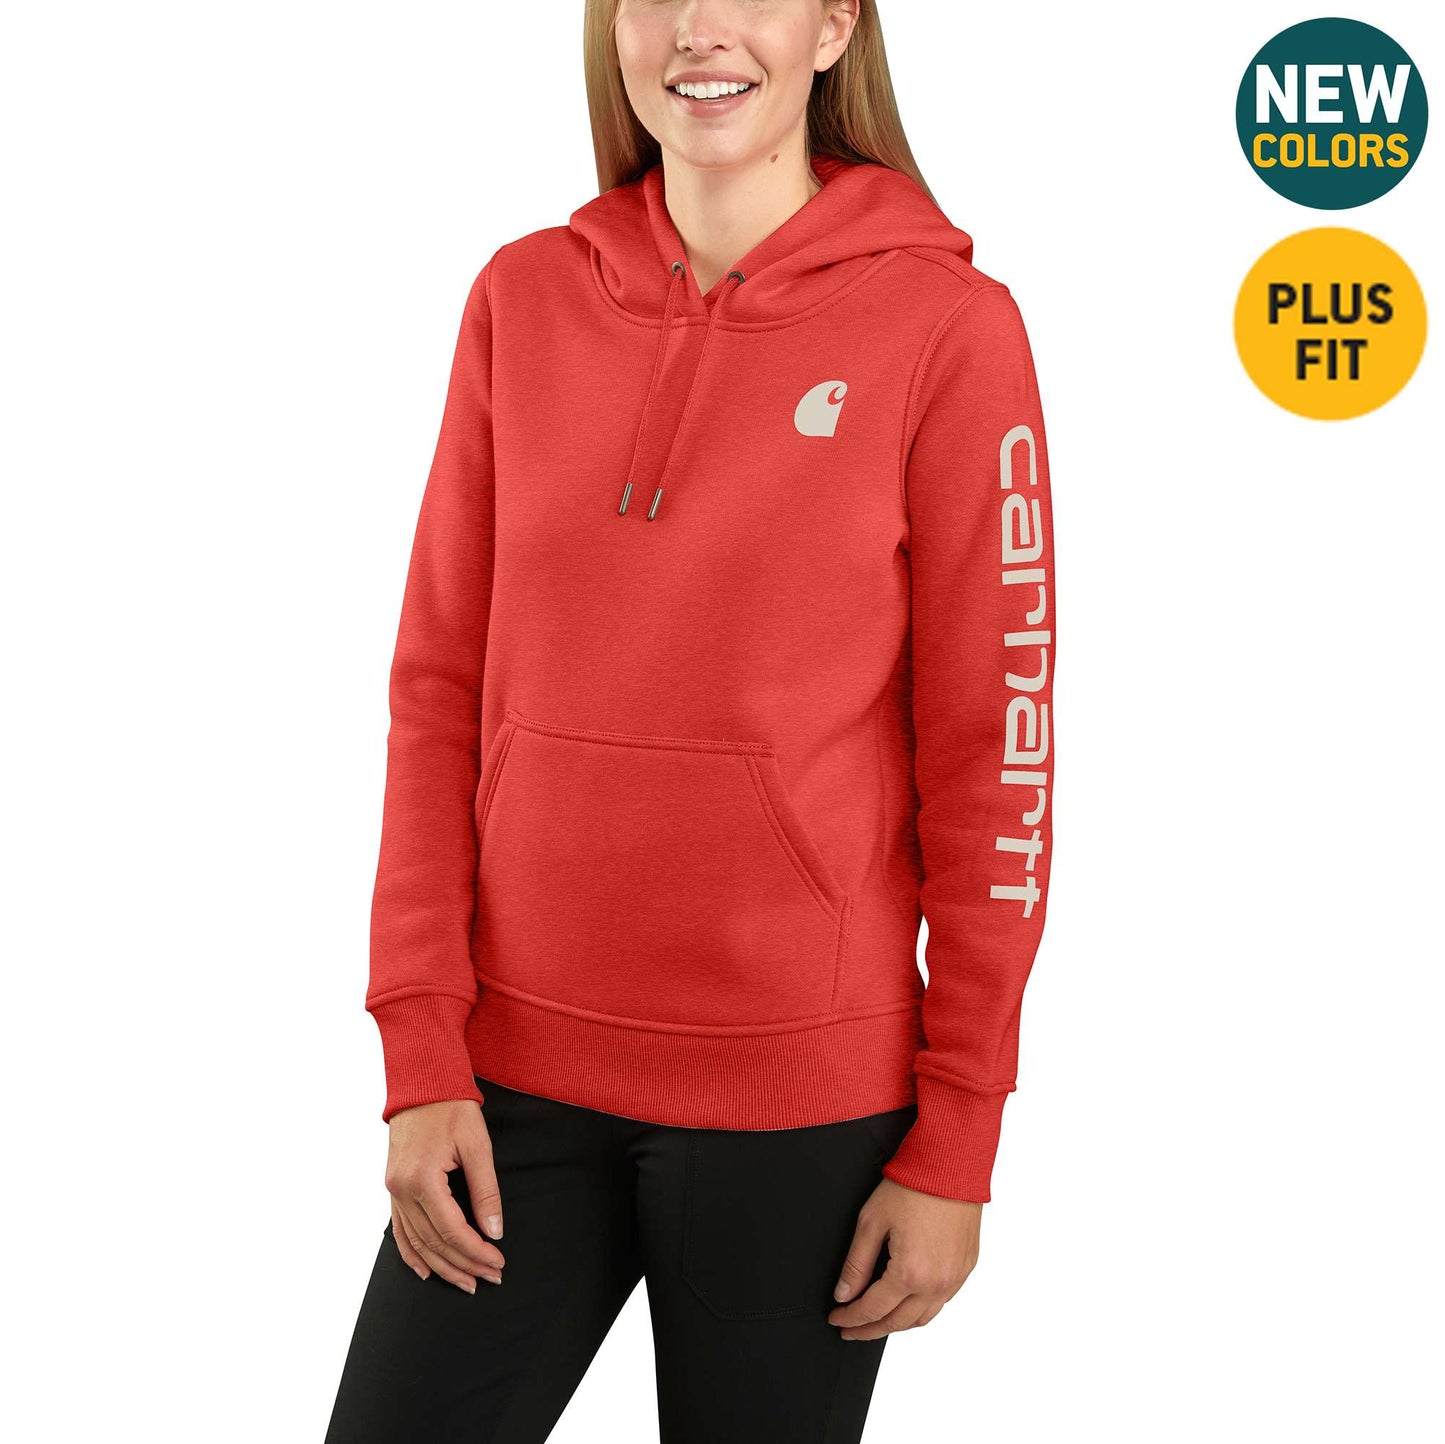 Women's Relaxed Fit Midweight Logo Sleeve Graphic Sweatshirt